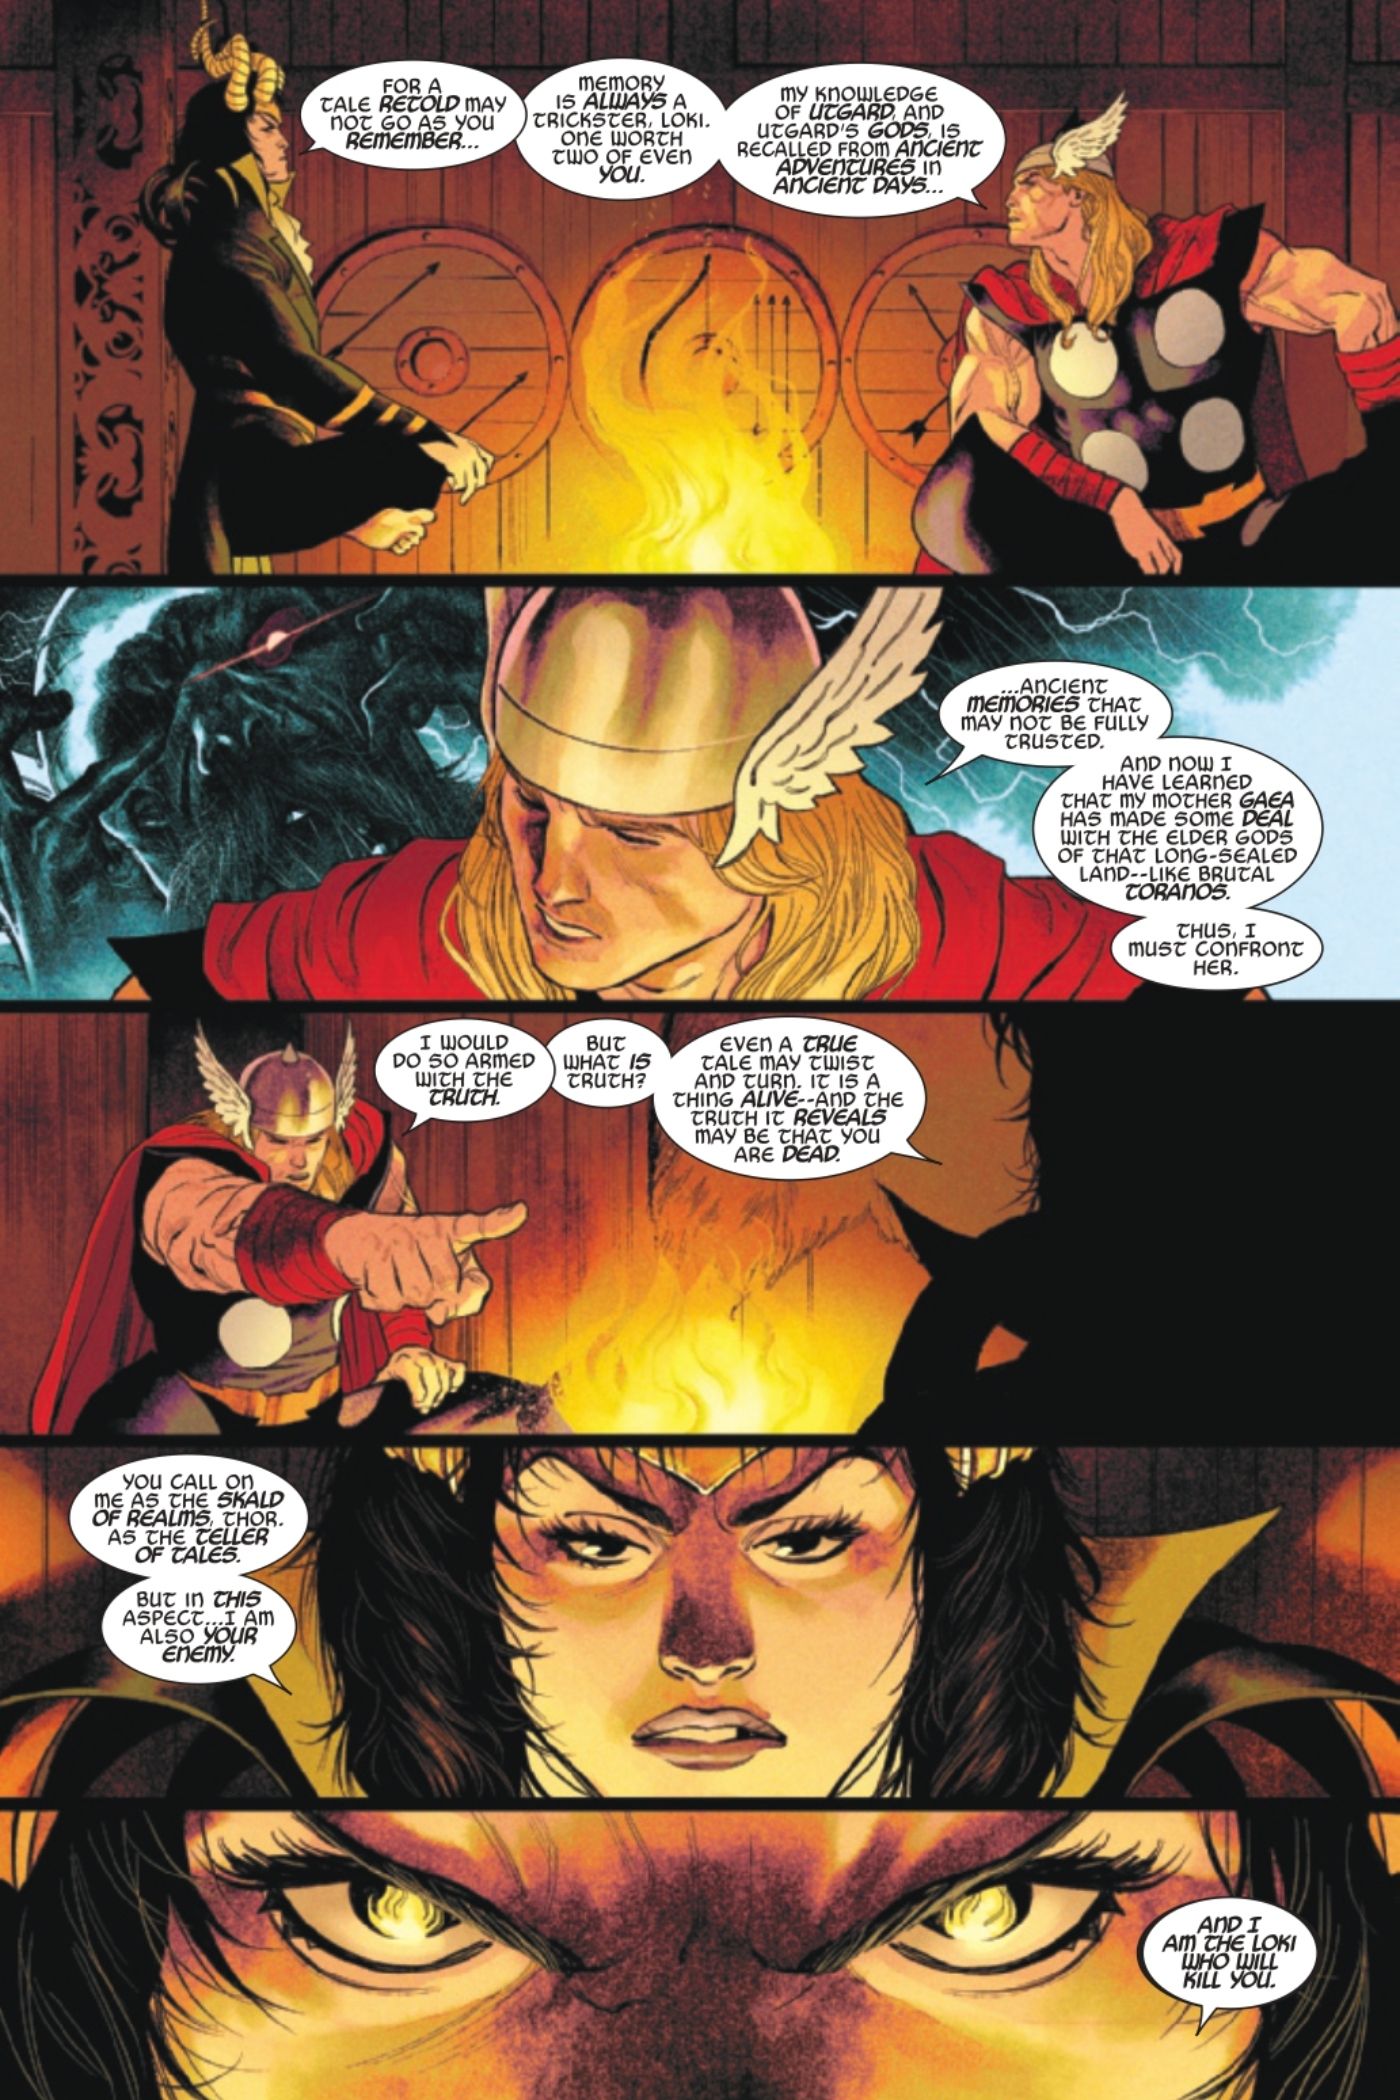 Immortal Thor #6 Preview page 5.